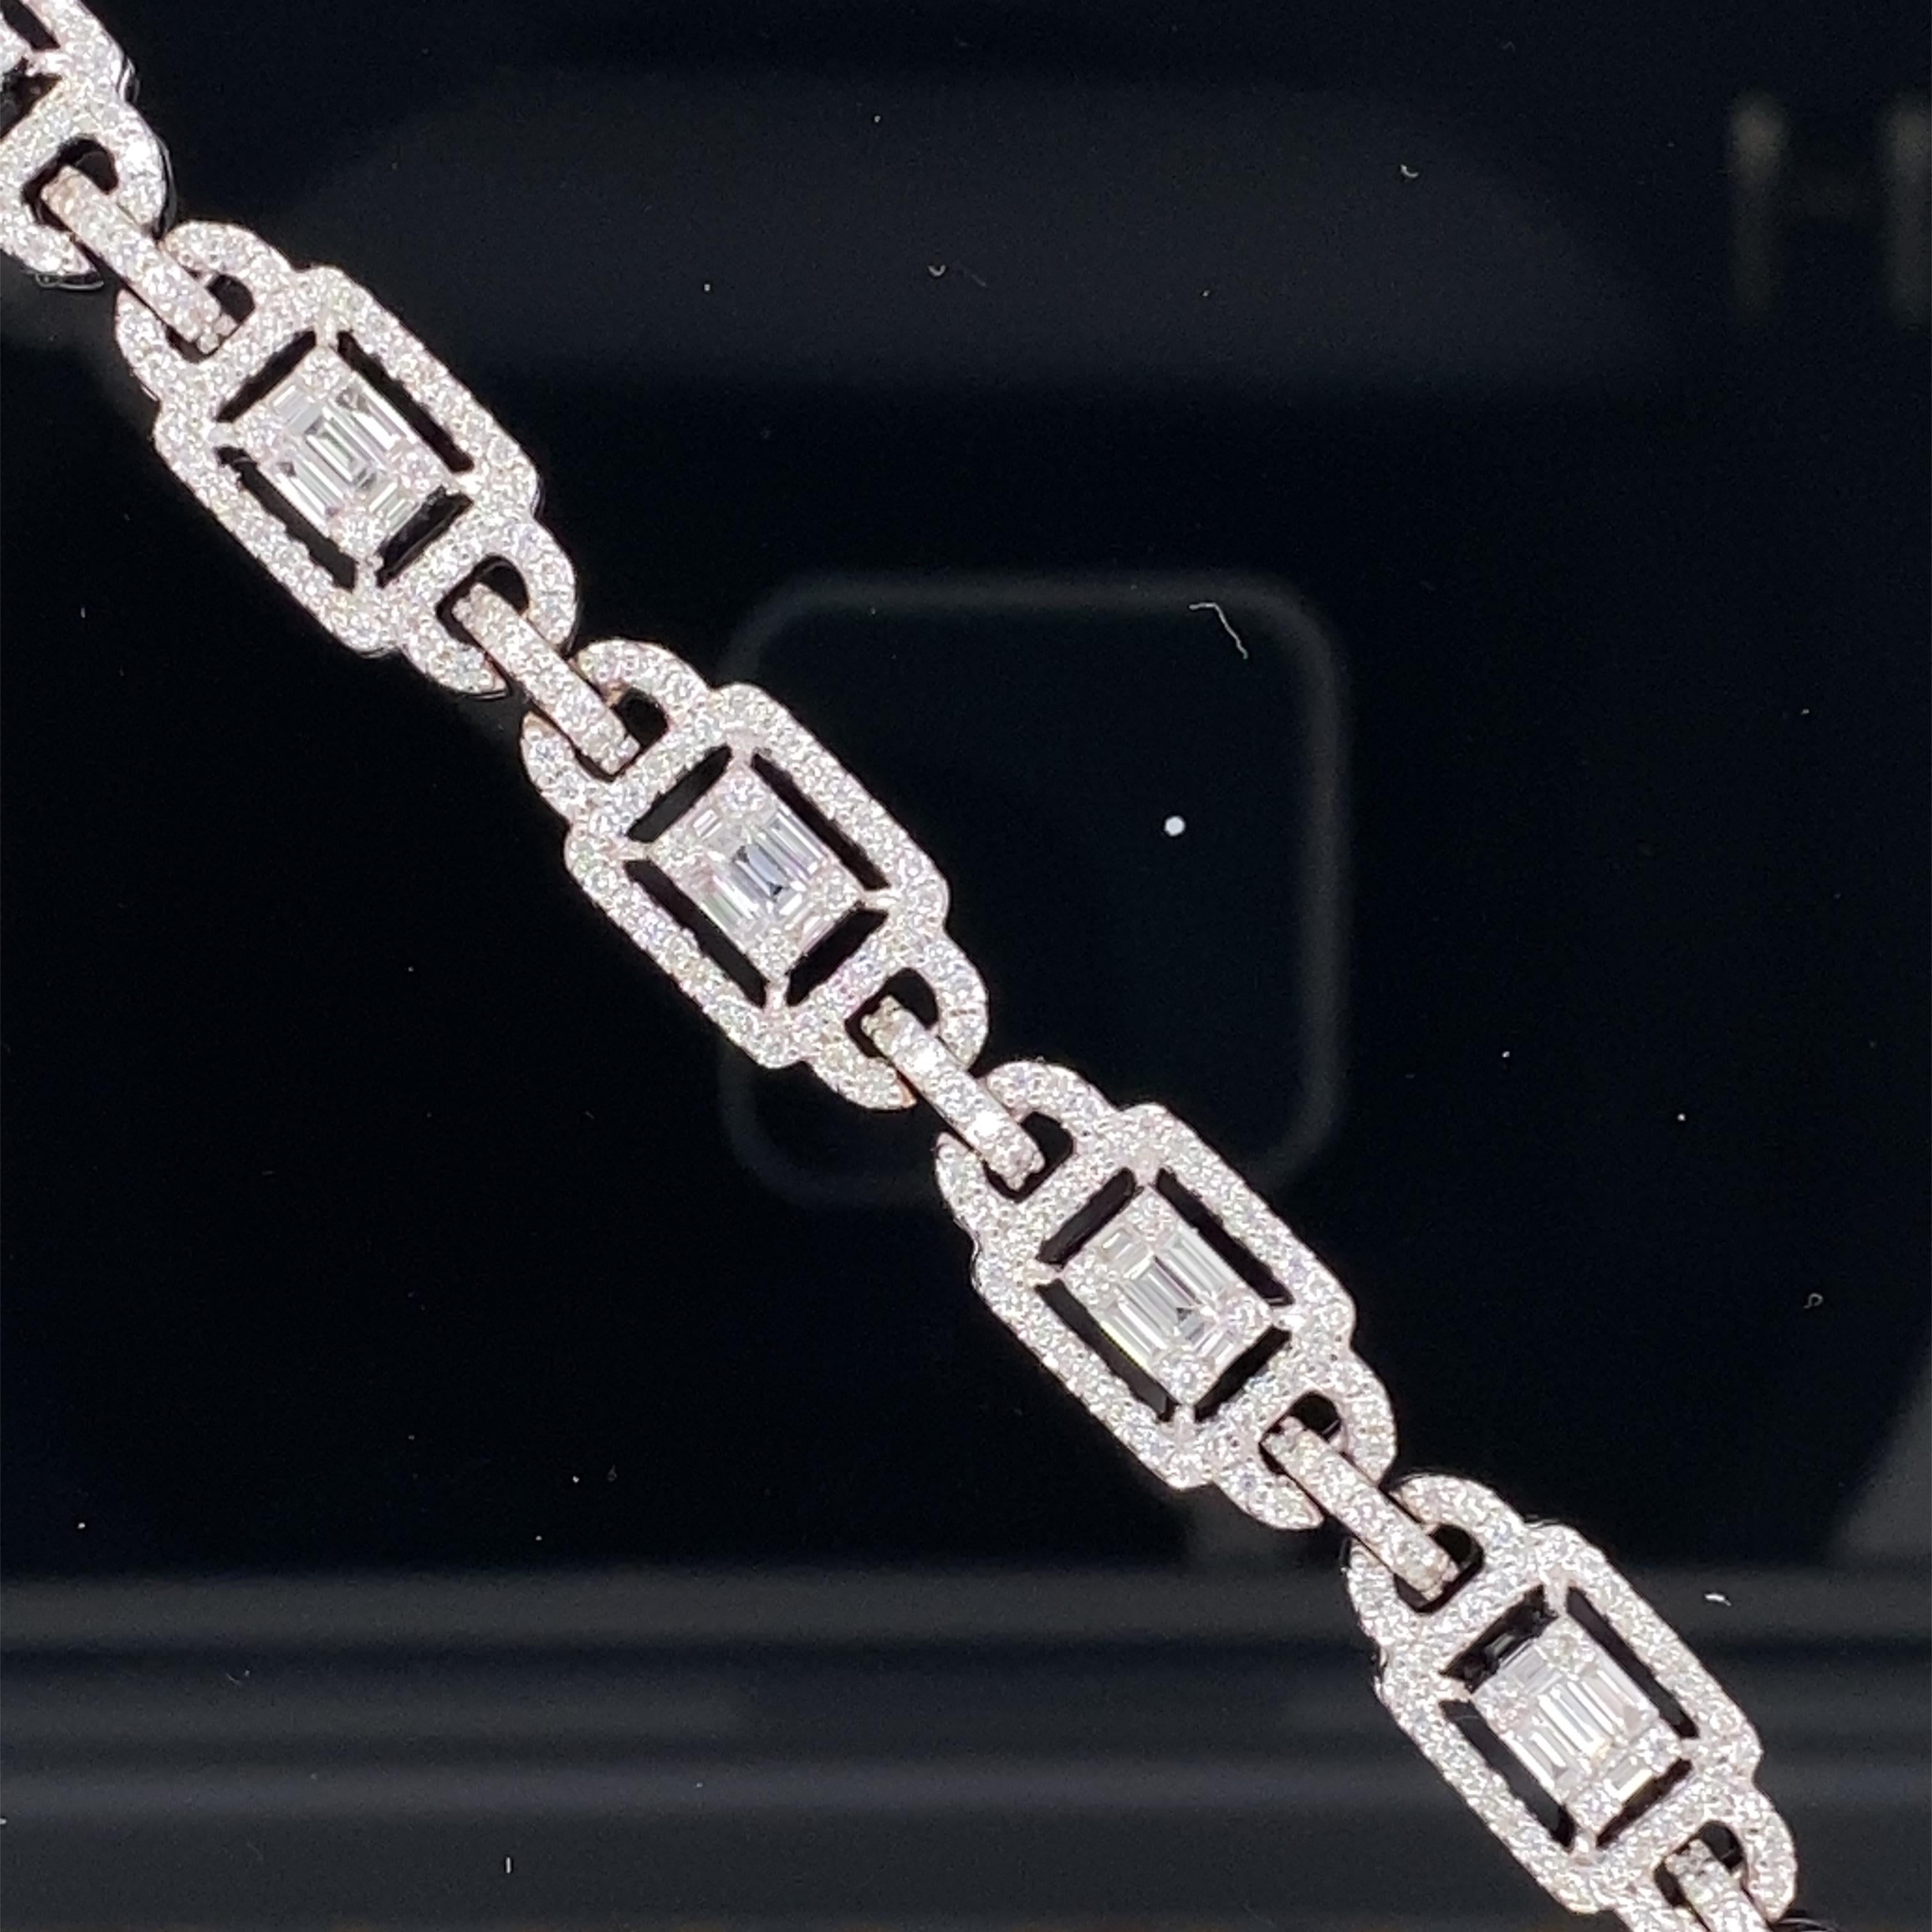 This stunning necklace features 49 emerald cut diamond clusters, each comprising of 5 baguette cut and 4 round diamonds. Each cluster is surrounded by a halo of round white diamonds. This necklace is 30